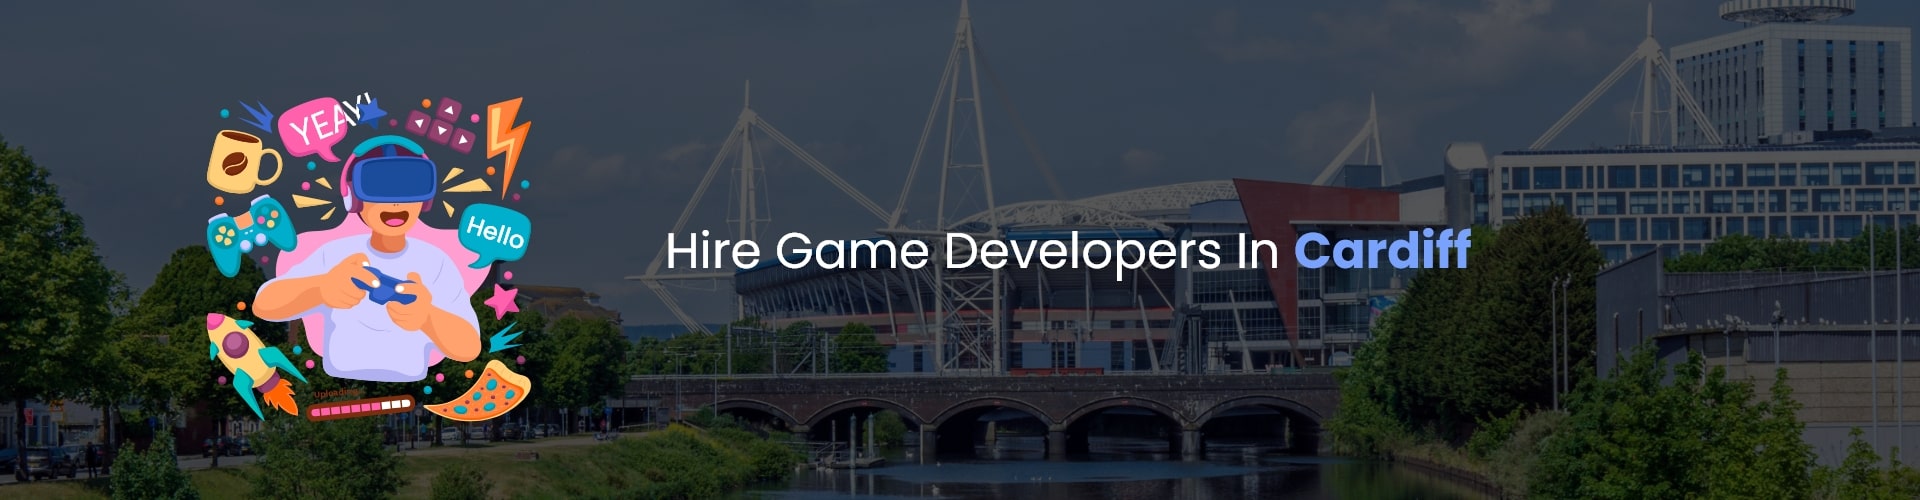 hire game developers in cardiff